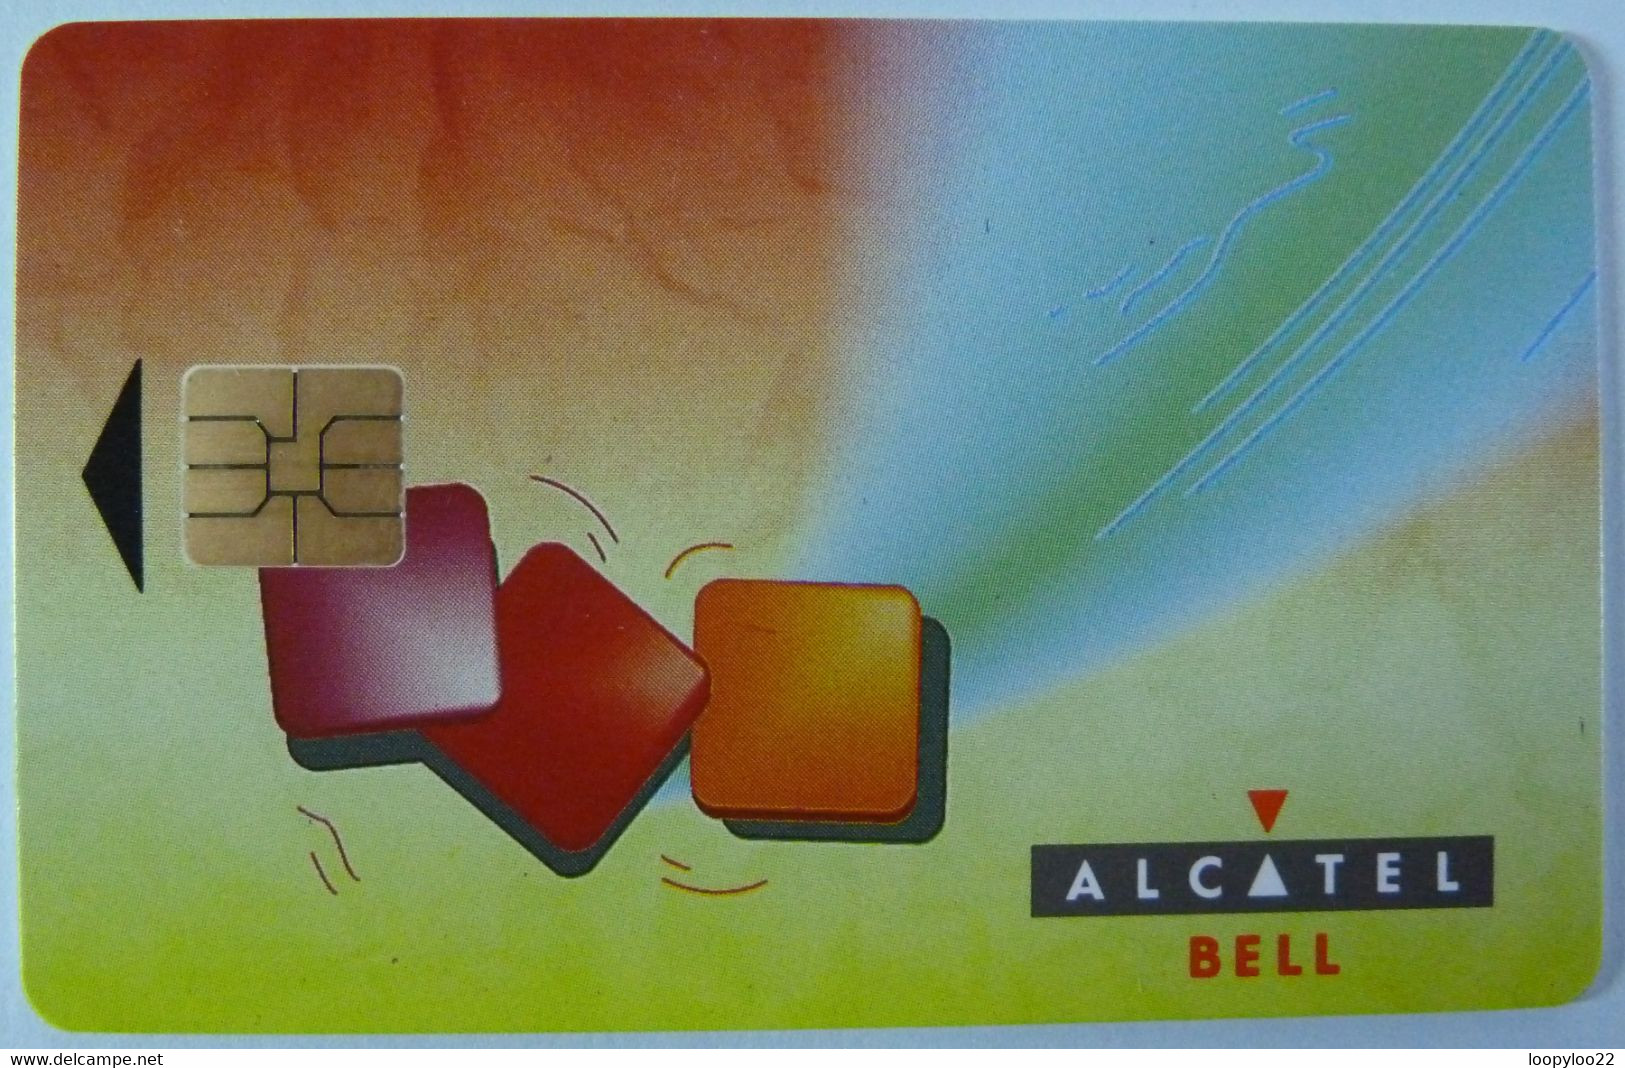 BELGIUM - Alcatel - Bell - Chip - Smart Card Demo - First Trial Issue - Mint - Service & Tests